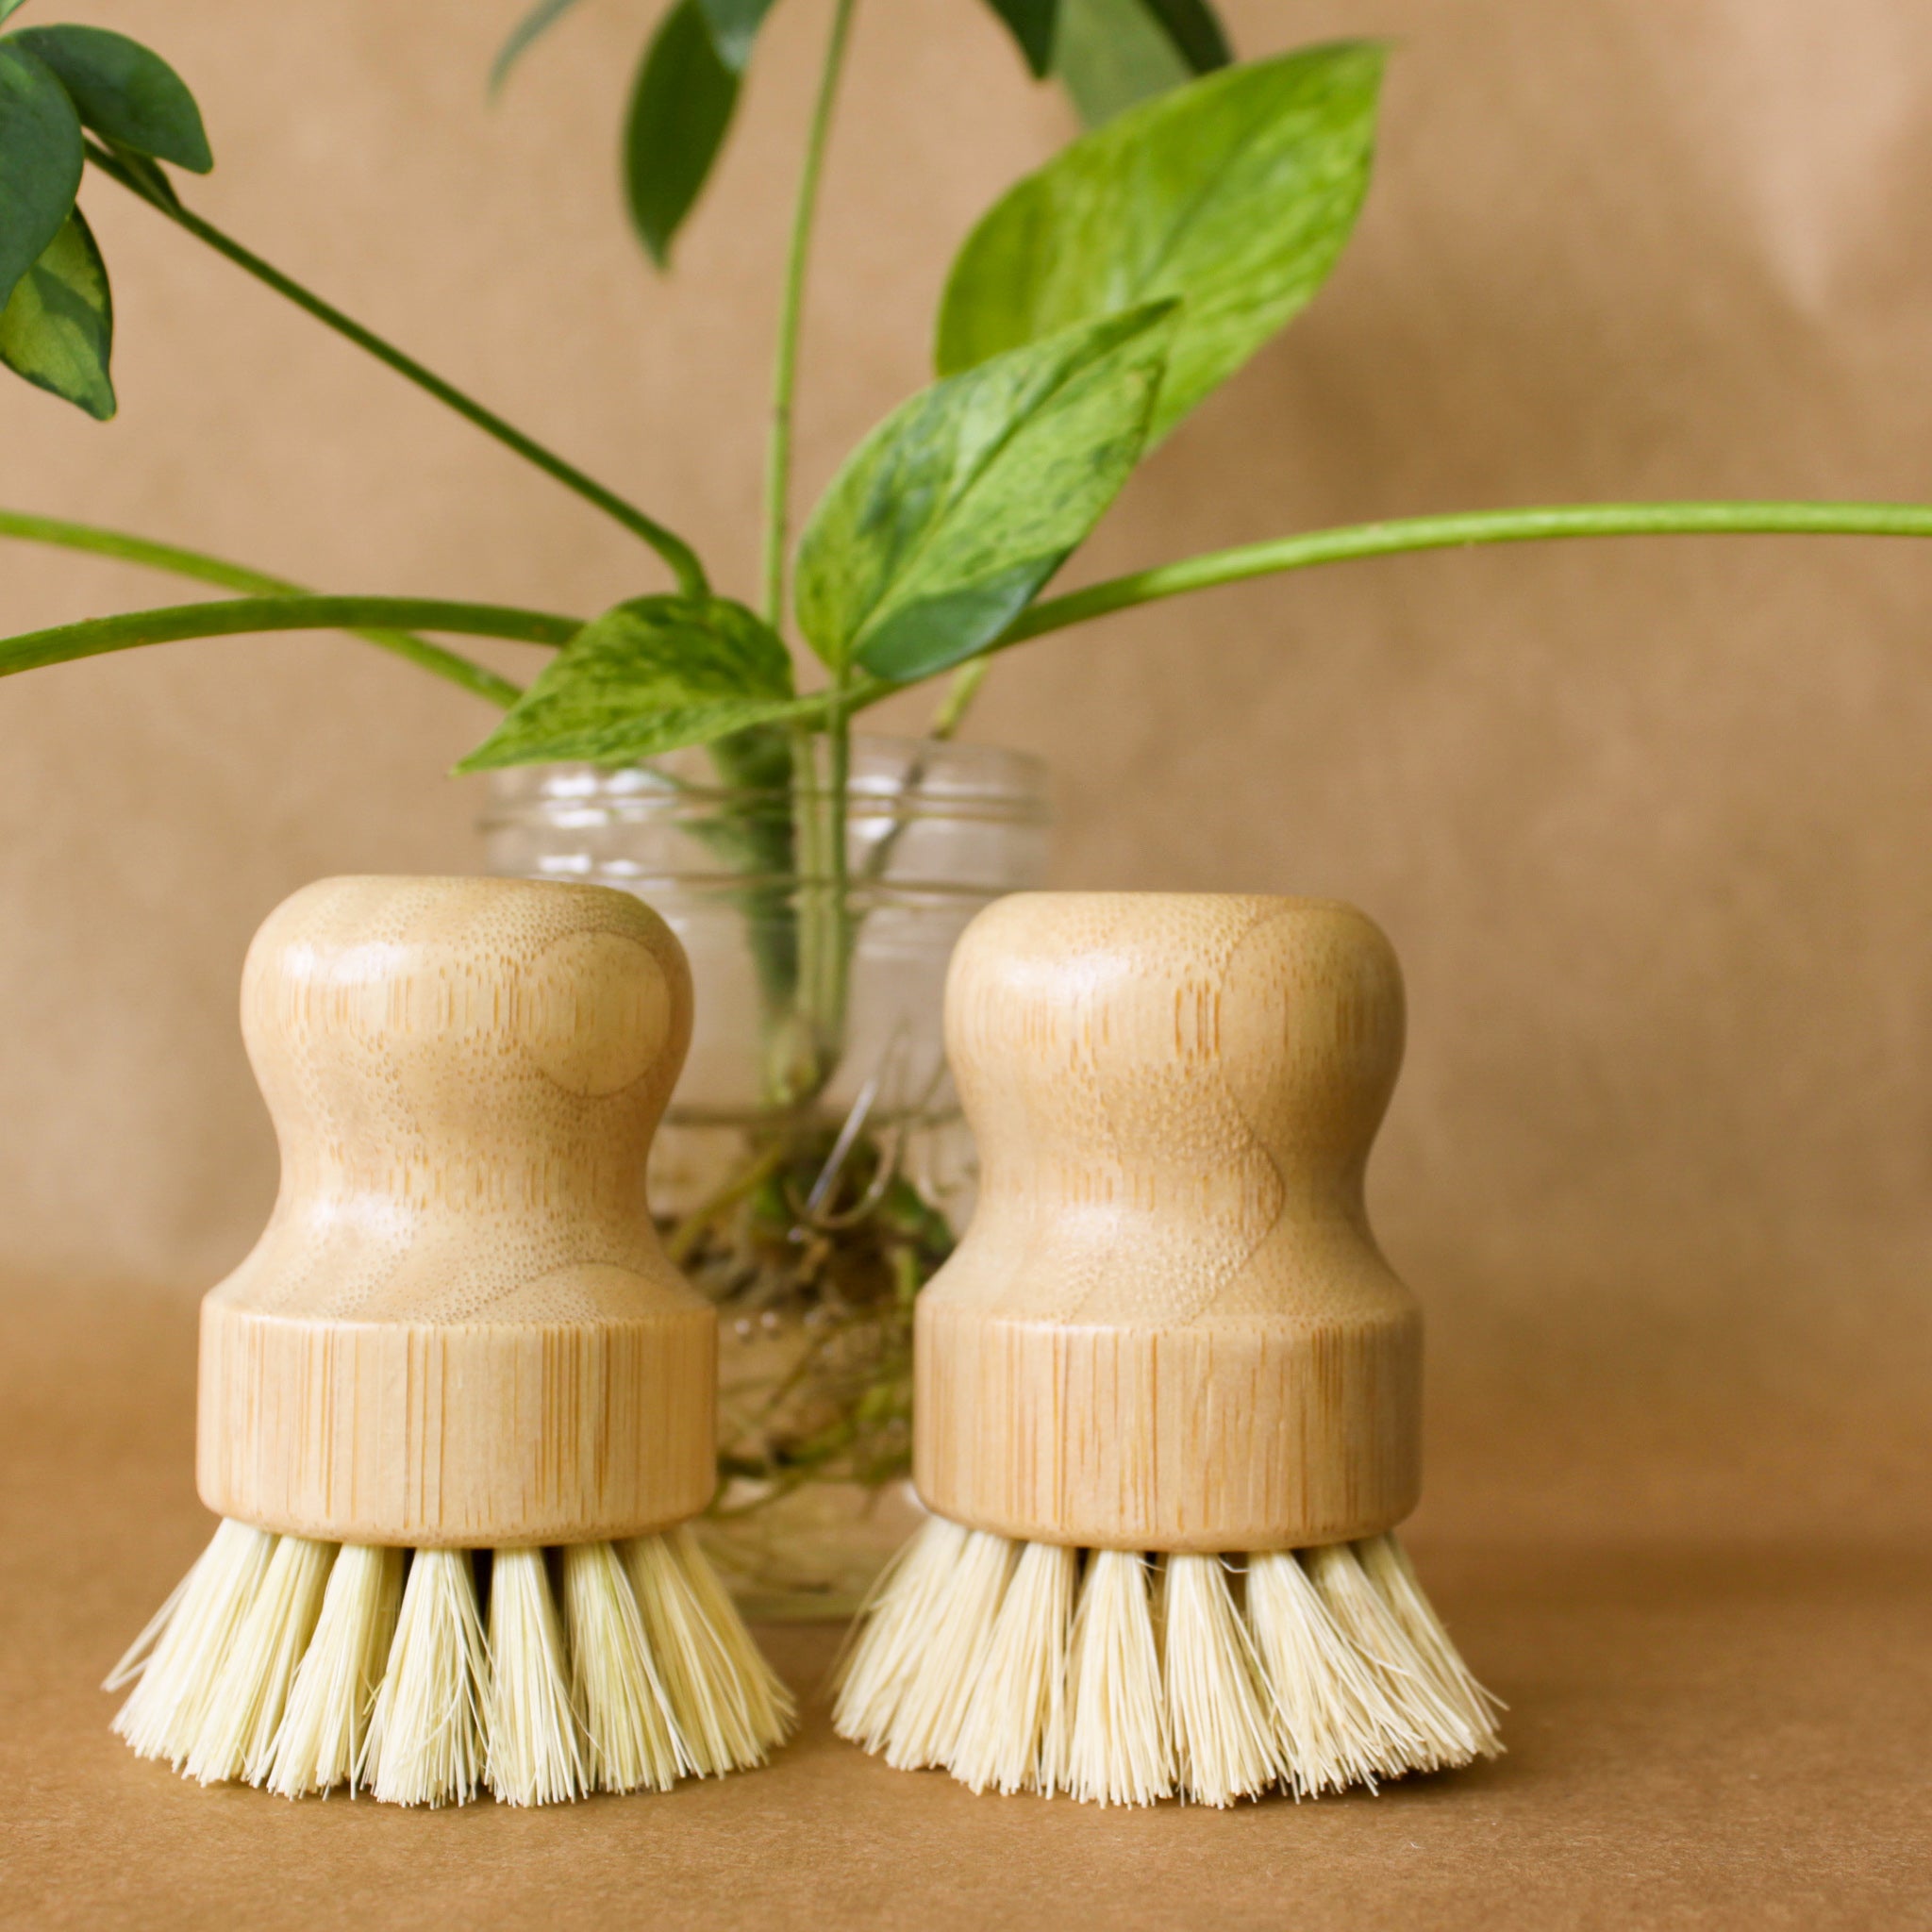 Kitchen Brushes- Pot Scrubbers